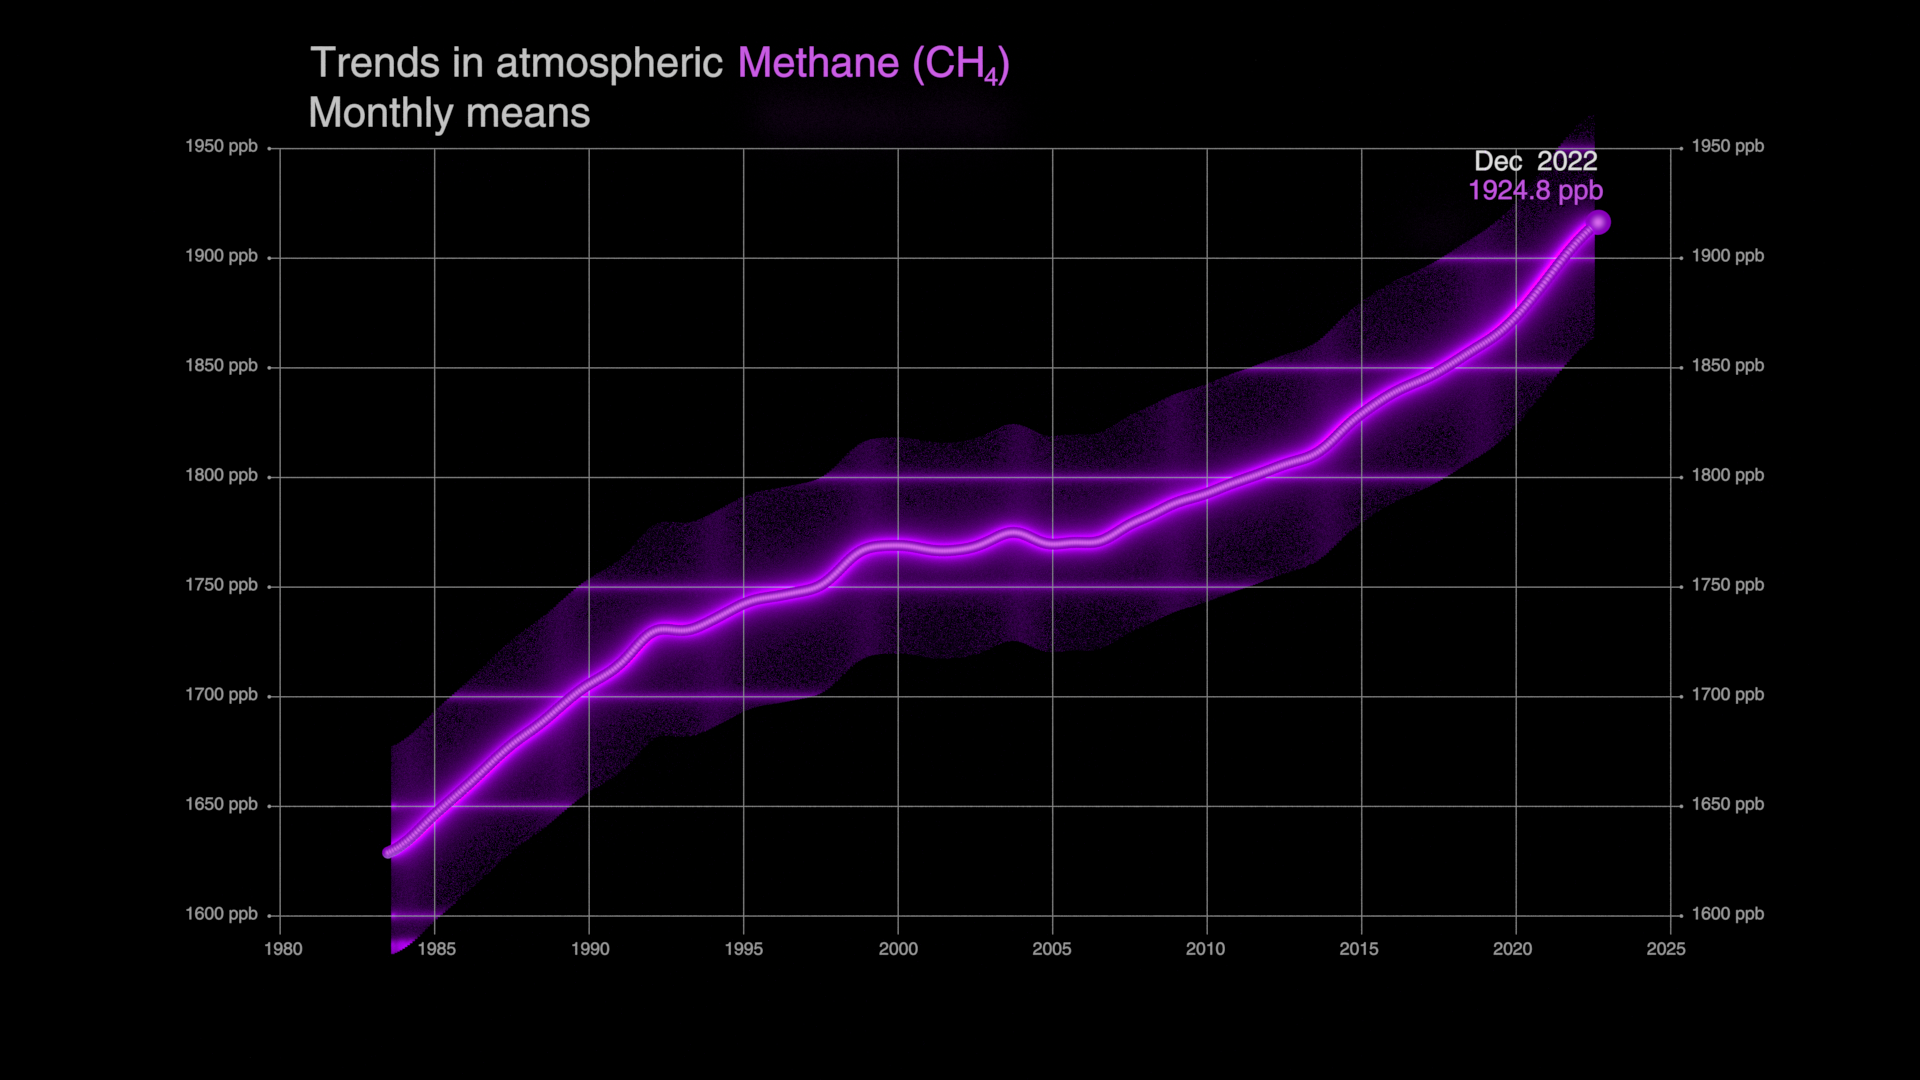 Global trends in atmospheric Methane (CH₄) for the period July 1983-December 2022.